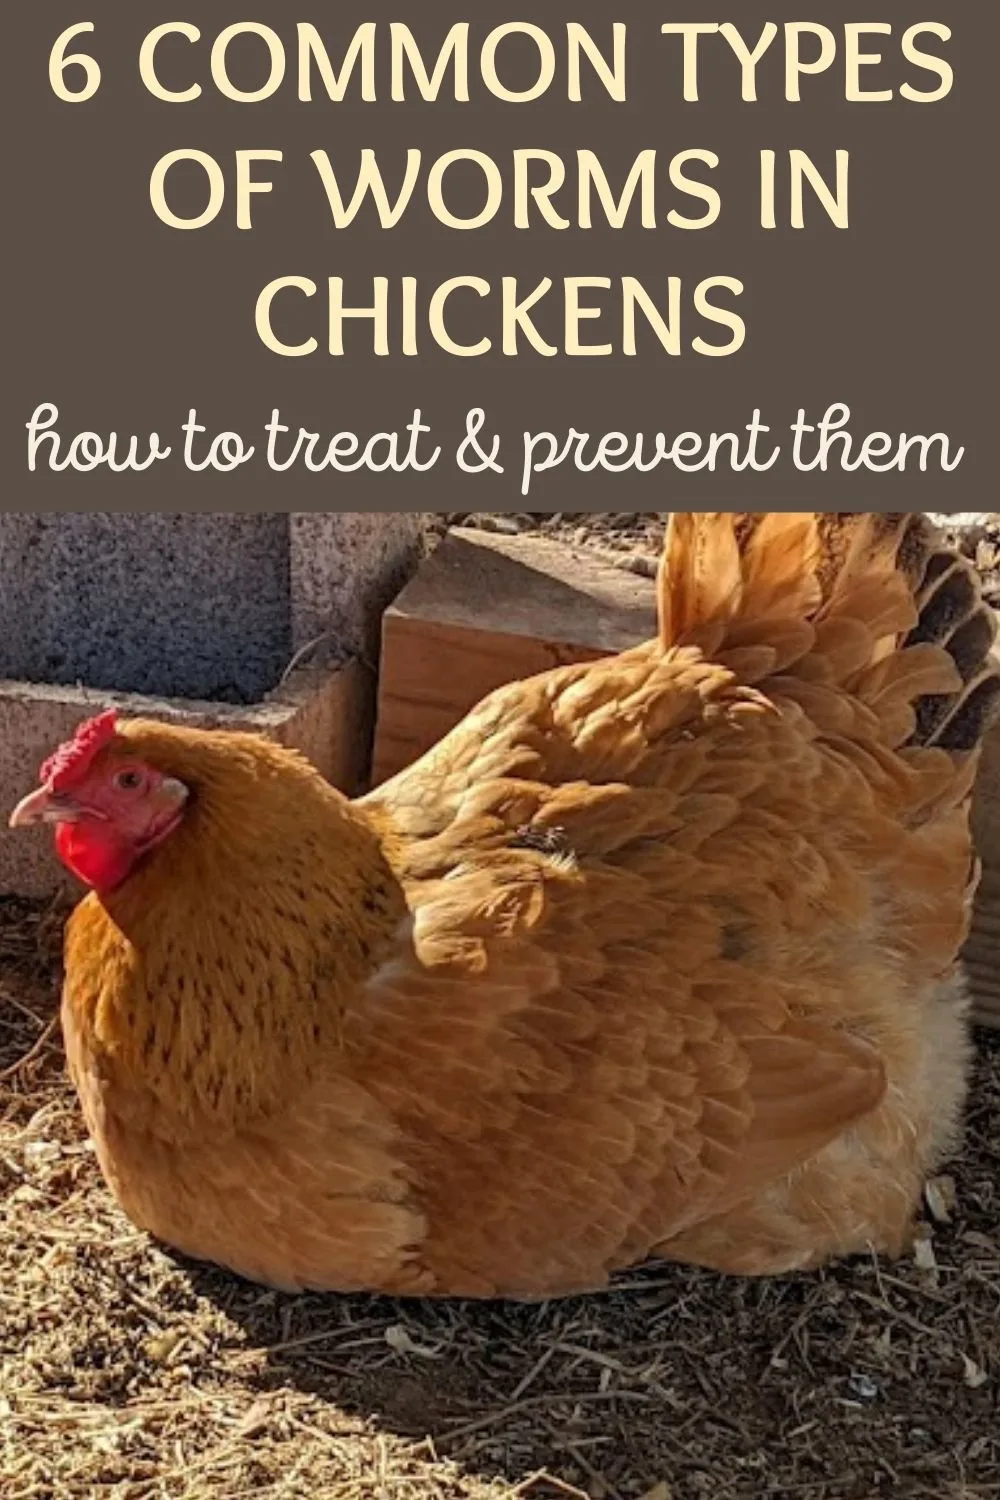 6 common types of worms in chickens